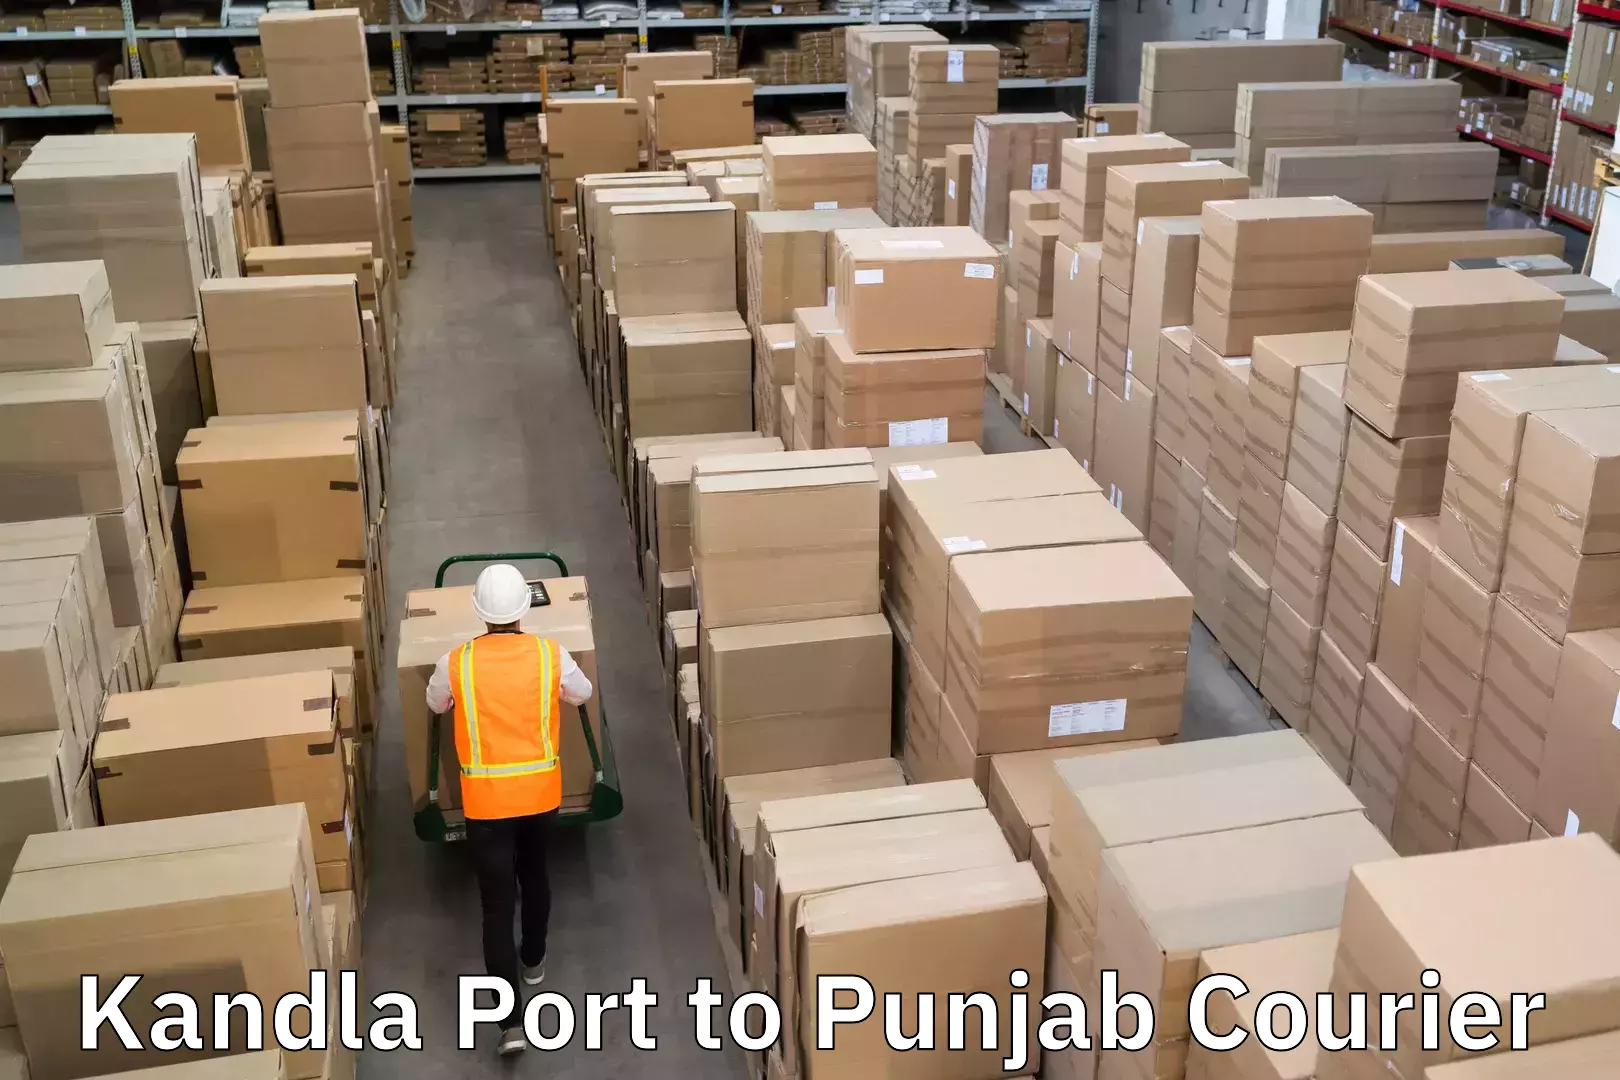 Tailored delivery services Kandla Port to Punjab